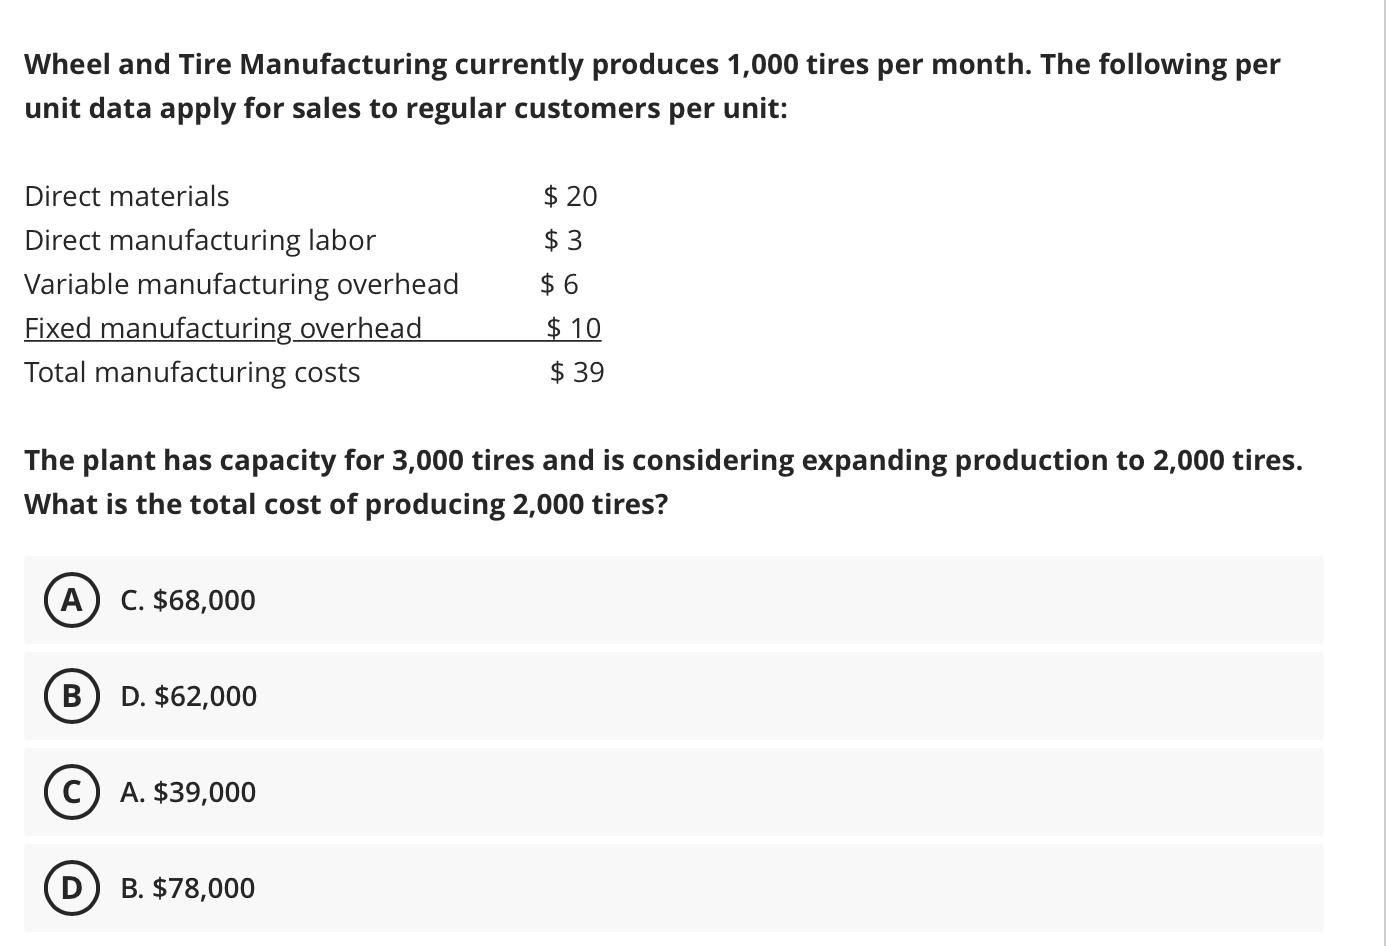 Wheel and Tire Manufacturing currently produces 1,000 tires per month. The following per unit data apply for sales to regular